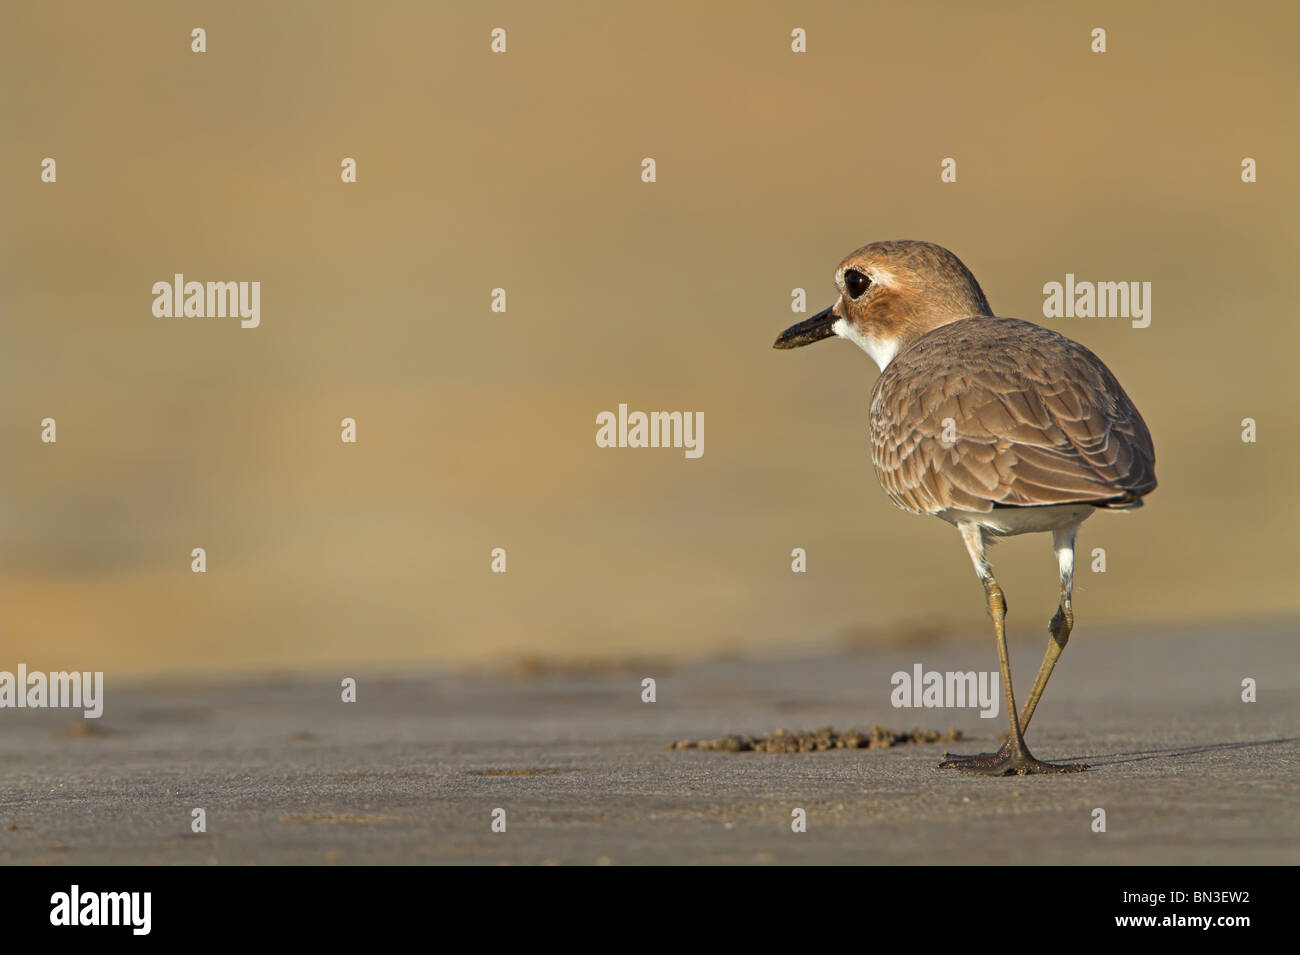 Greater Sand Plover (Charadrius leschenaultii), rear view Stock Photo